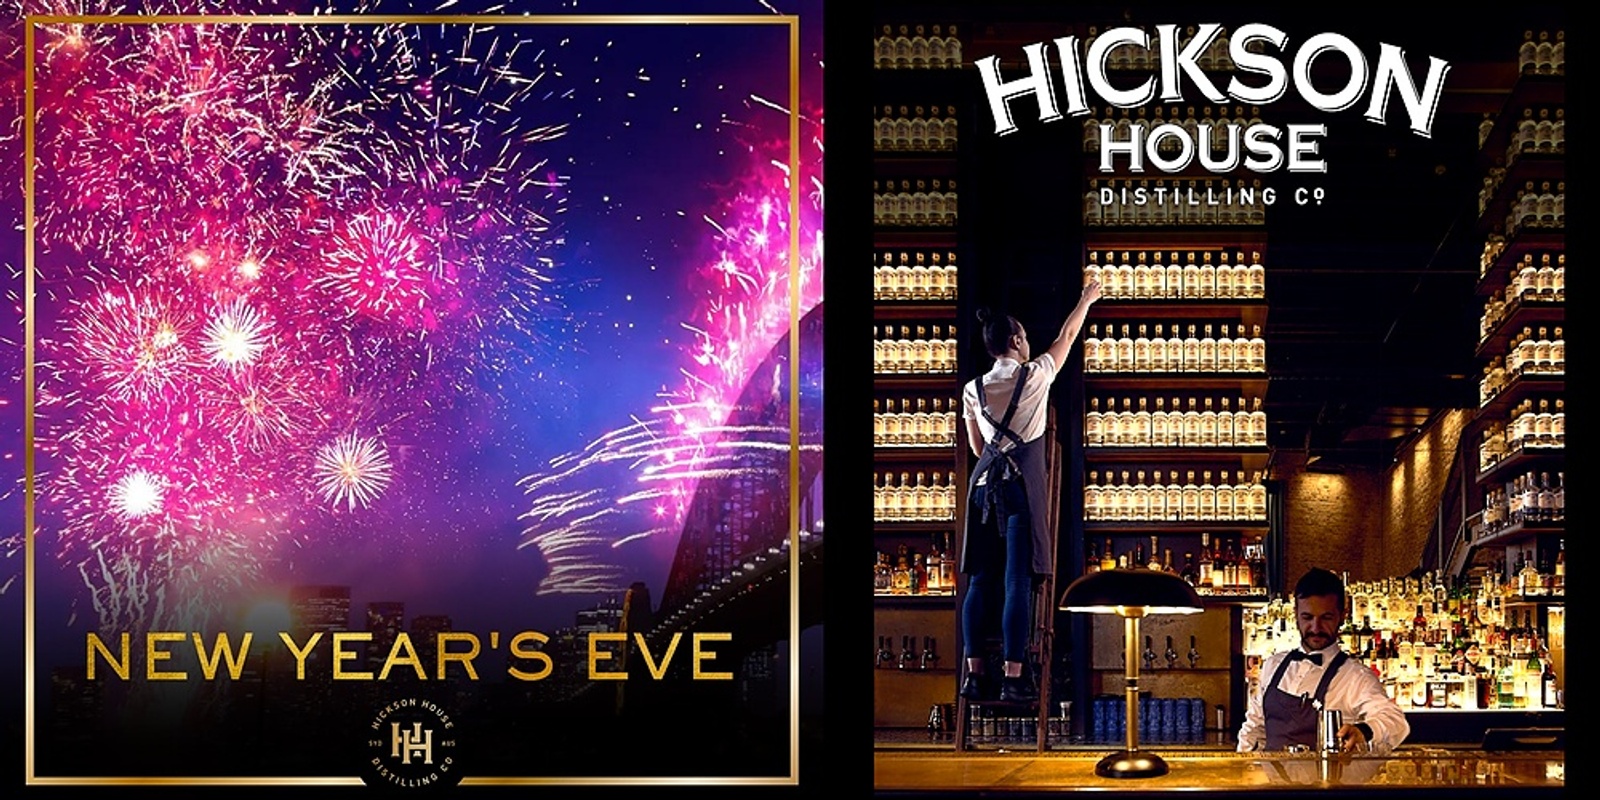 Banner image for Hickson House New Year's Eve Party & Fireworks